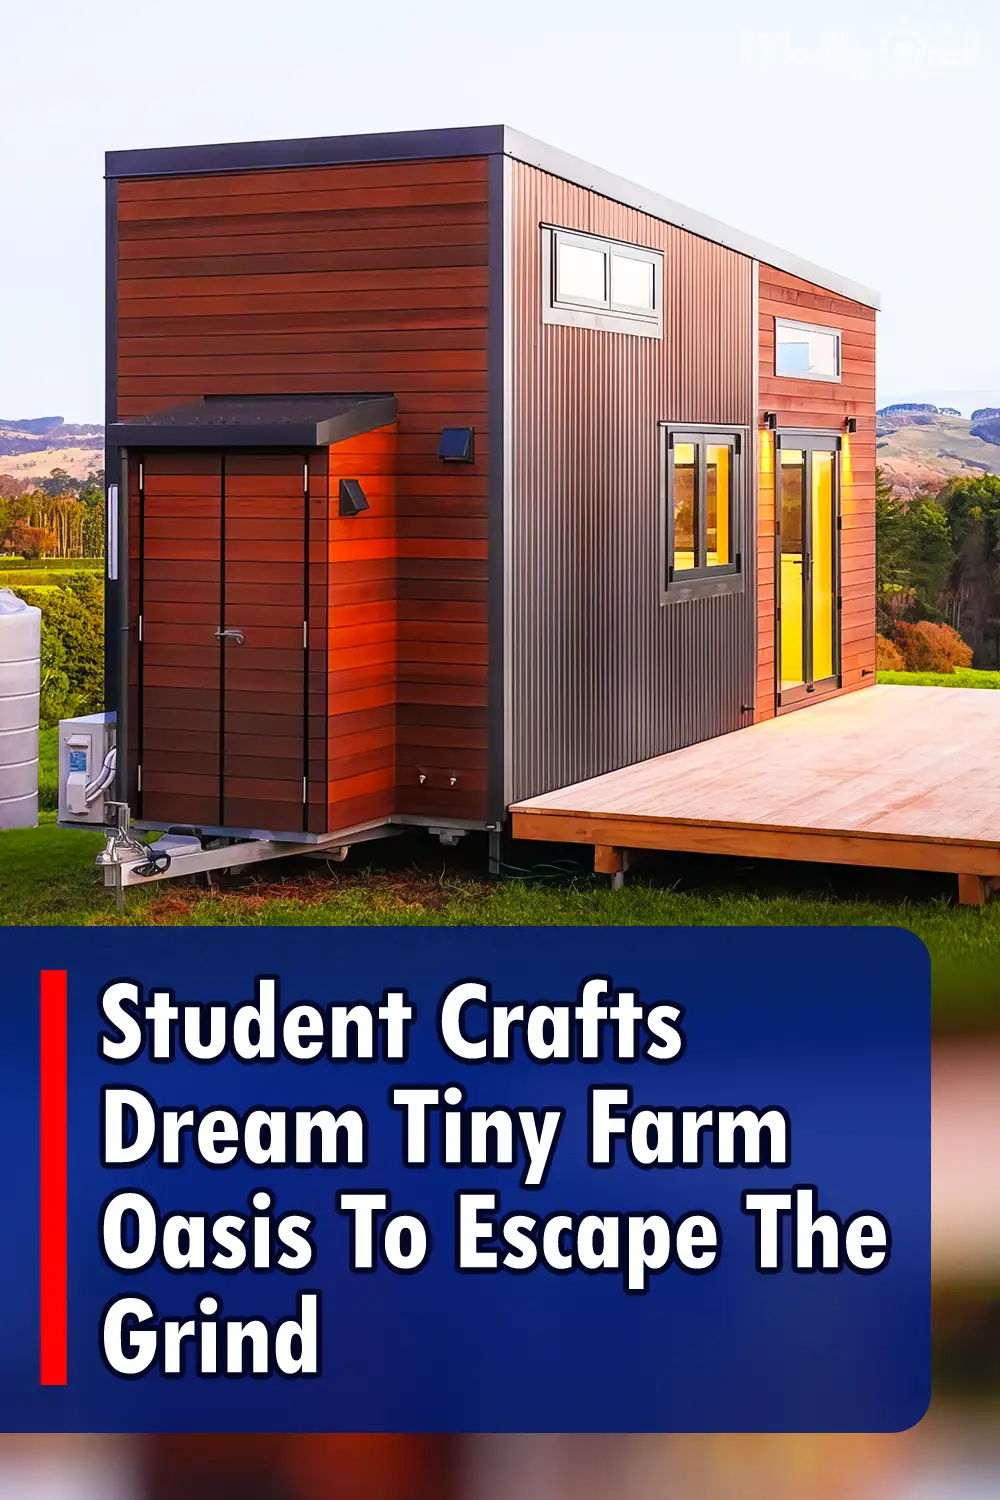 Student Crafts Dream Tiny Farm Oasis To Escape The Grind